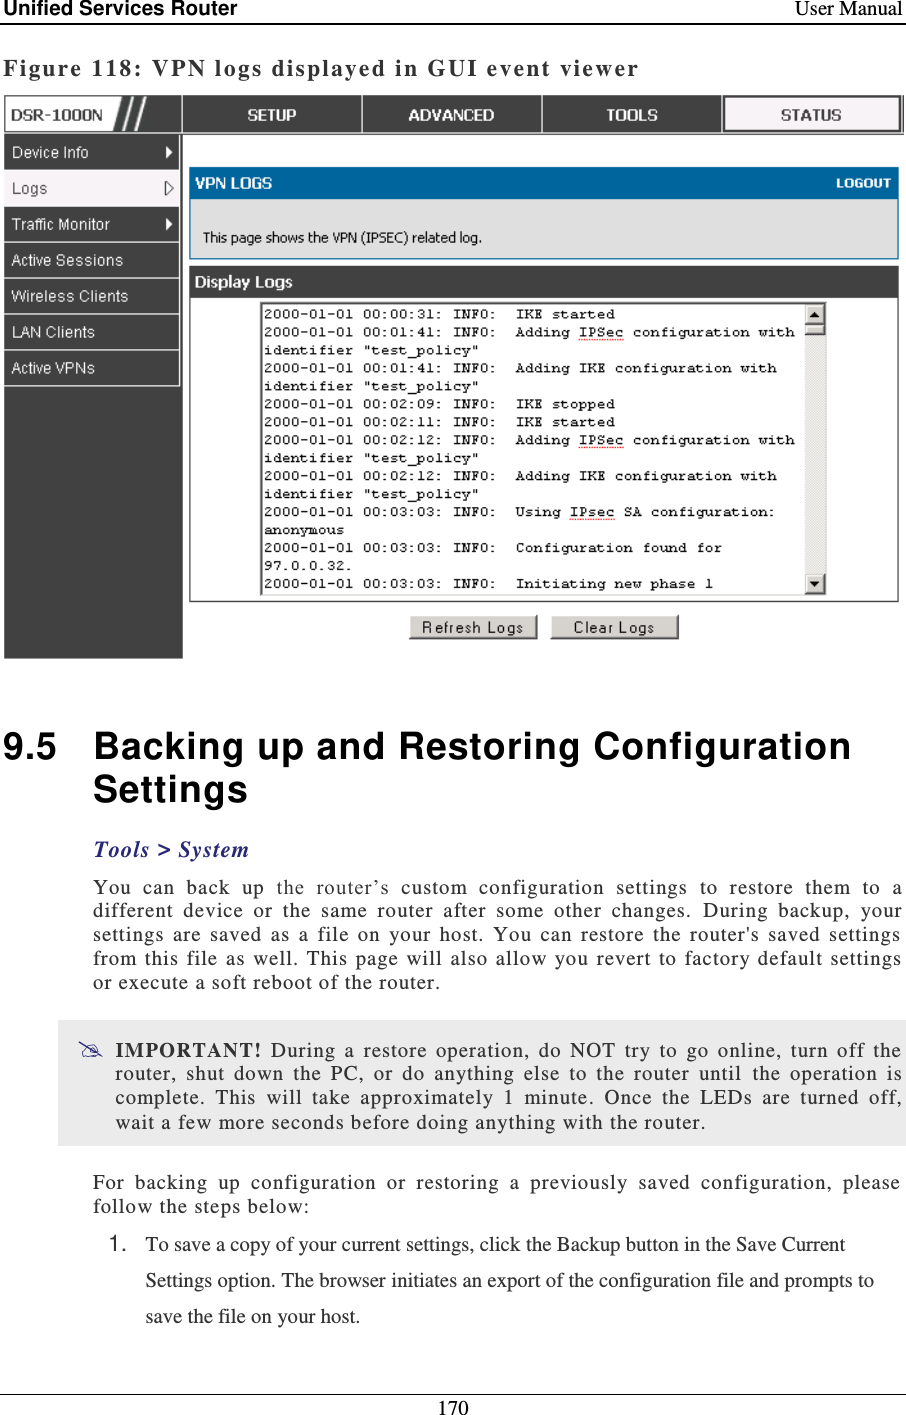 Unified Services Router    User Manual 170  Figure 118: VPN logs displaye d i n GUI event viewer    9.5  Backing up and Restoring Configuration Settings Tools &gt; System You  can  back  up  the  router’s  custom  configuration  settings  to  restore  them  to  a different  device  or  the  same  router  after  some  other  changes.   During  backup,  your settings  are  saved  as  a  file  on  your  host.  You  can  restore  the  router&apos;s  saved  settings from  this  file  as well. This page  will  also  allow  you  revert  to  factory  default settings or execute a soft reboot of the router.   IMPORTANT!  During  a  restore  operation,  do  NOT  try  to  go  online,  turn  off  the router,  shut  down  the  PC,  or  do  anything  else  to  the  router  until  the  operation  is complete.  This  will  take  approximately  1  minute.  Once  the  LEDs  are  turned  off, wait a few more seconds before doing anything with the router.  For  backing  up  configuration  or  restoring  a  previously  saved  configuration,  please follow the steps below: 1. To save a copy of your current settings, click the Backup button in the Save Current Settings option. The browser initiates an export of the configuration file and prompts to save the file on your host. 